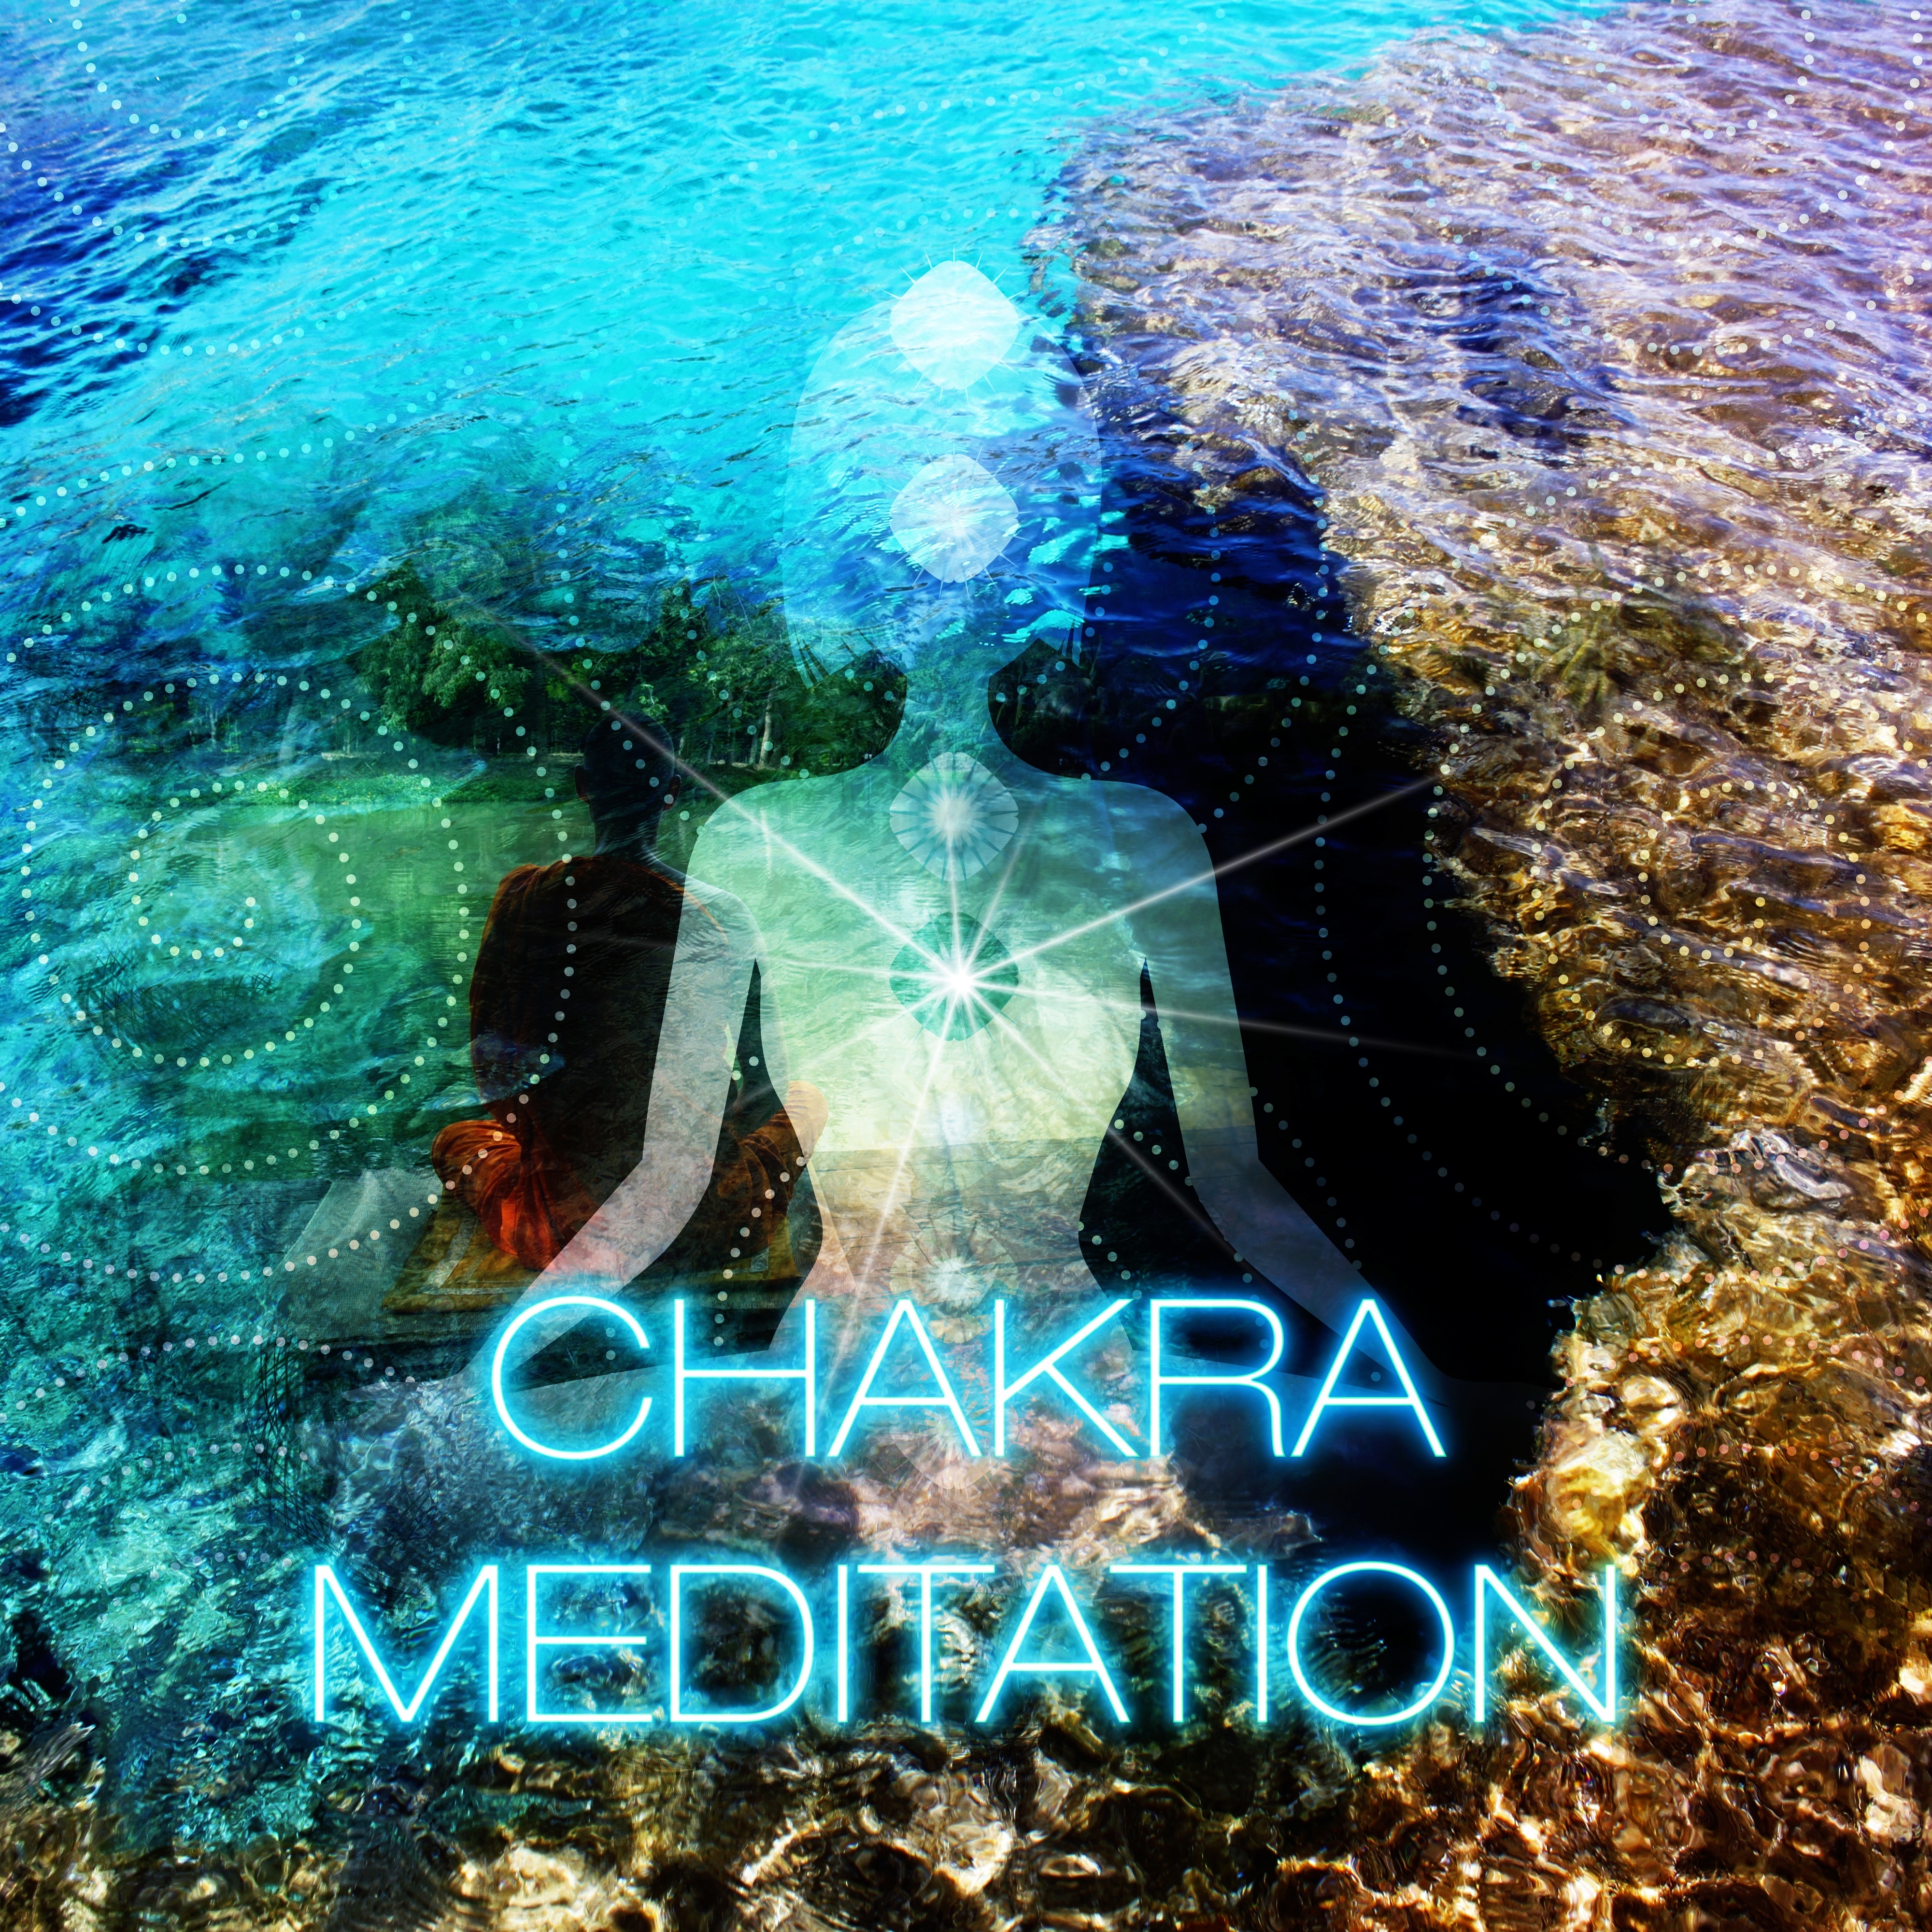 Chakra Meditation - Massage & Spa Music, Serenity Relaxing Spa Music, Instrumental Music for Massage Therapy, Piano Music and Sounds of Nature Music for Relaxation